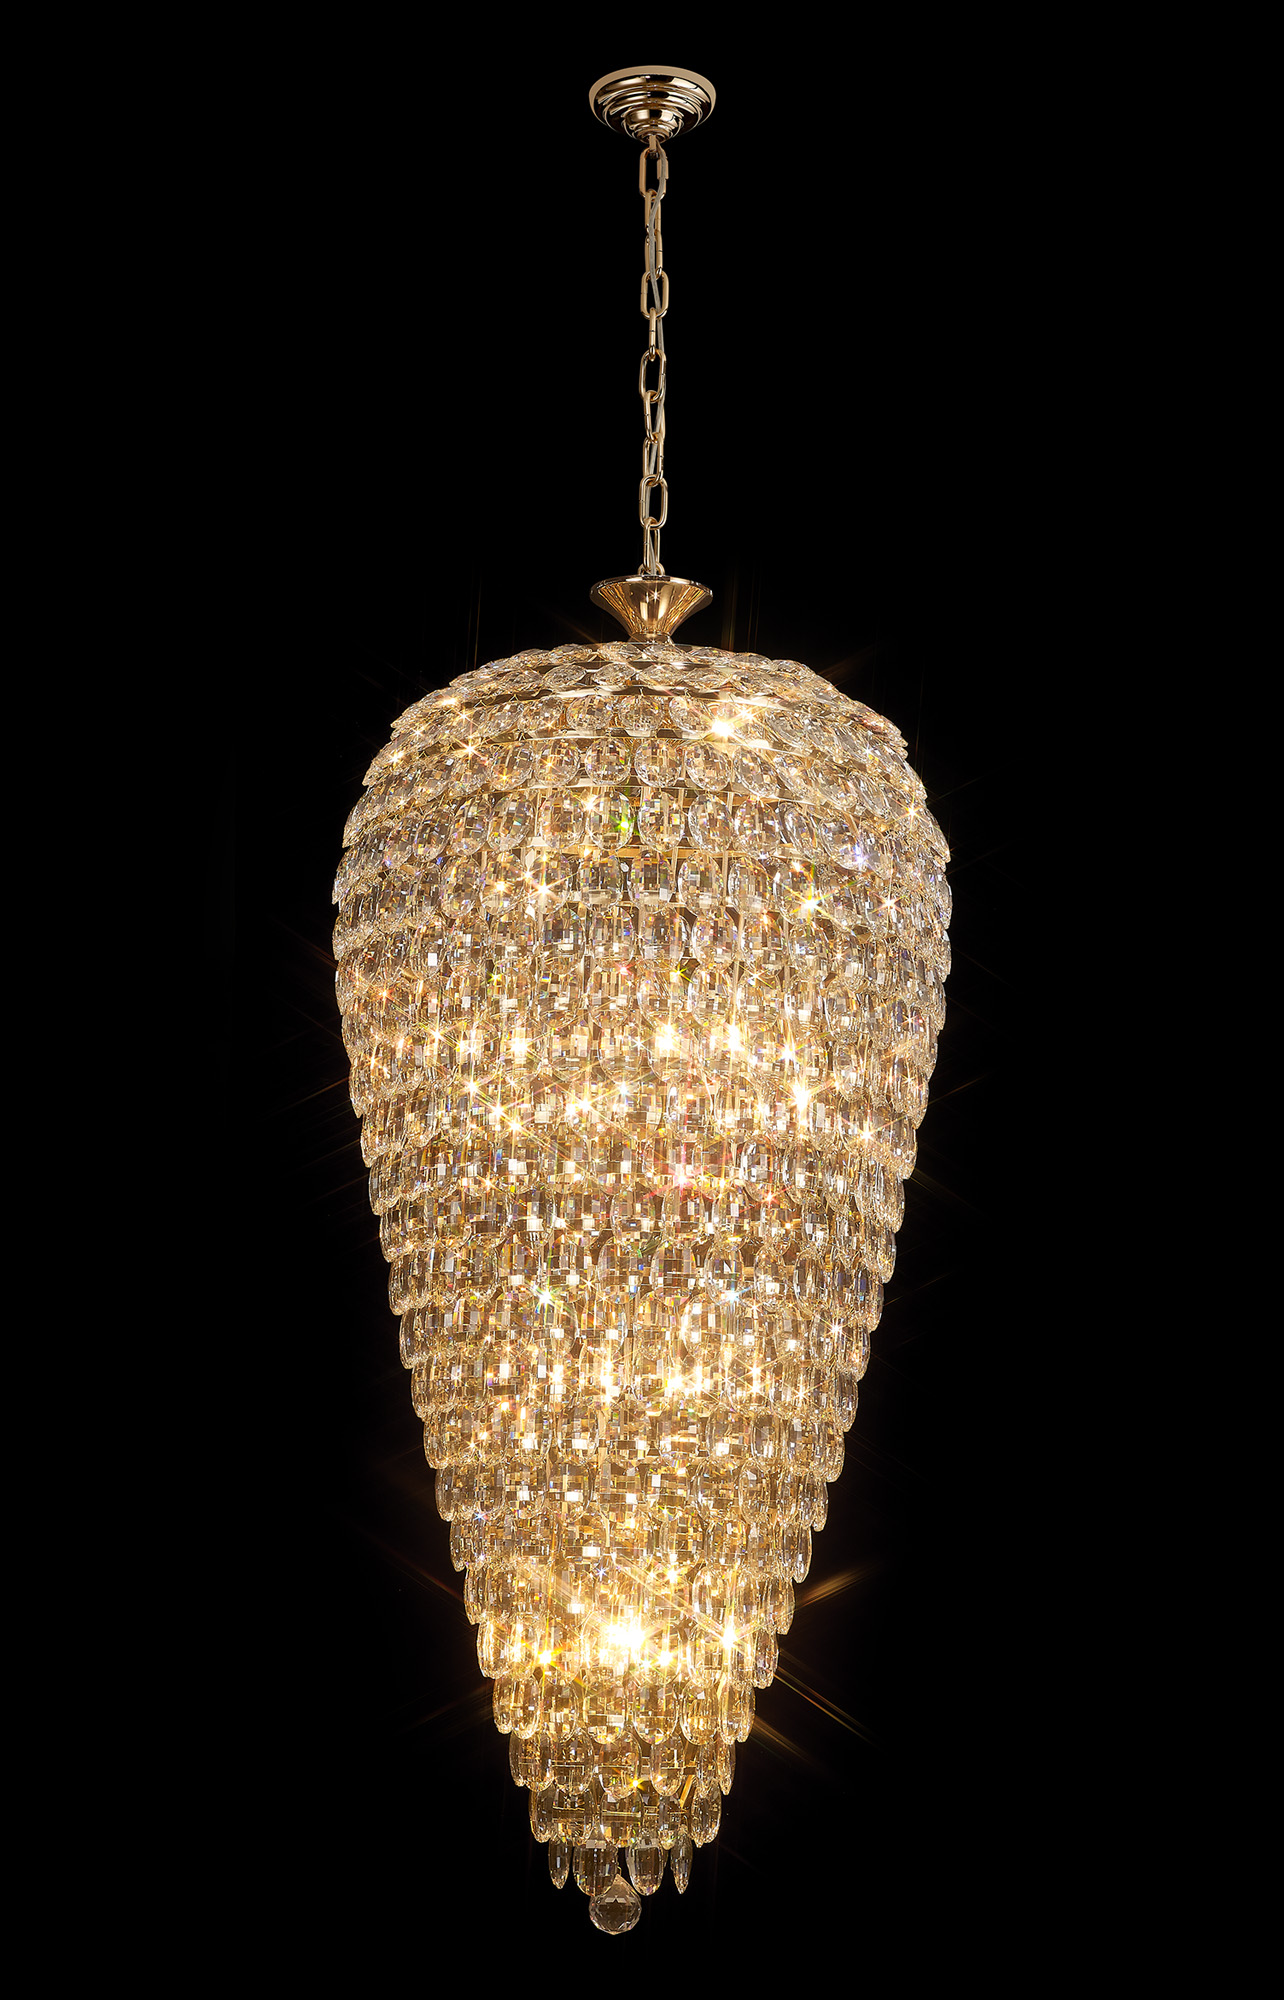 Coniston French Gold Crystal Ceiling Lights Diyas Statement Crystal Fittings